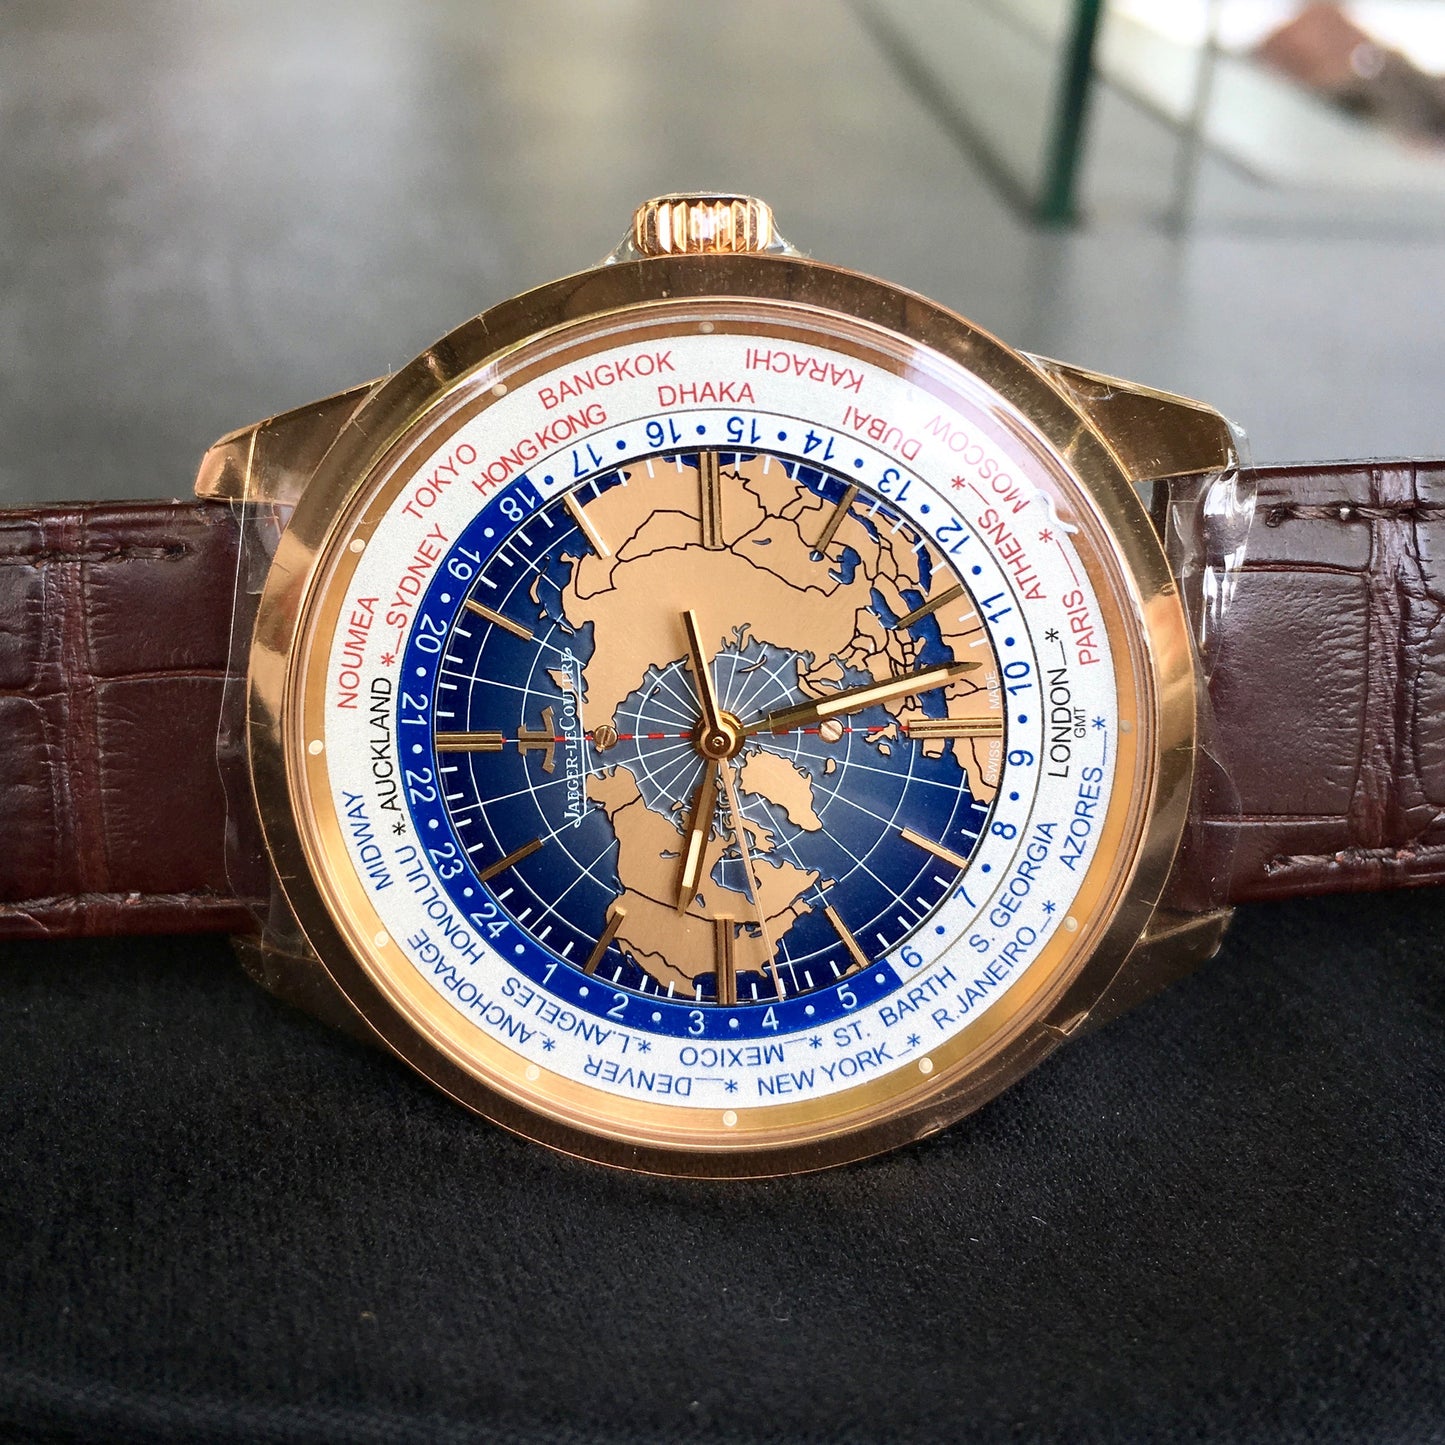 Jaeger LeCoultre Geophysic Universal Time Q8102520 Automatic Blue Lacquer Dial 18K Pink Gold Wristwatch - Hashtag Watch Company